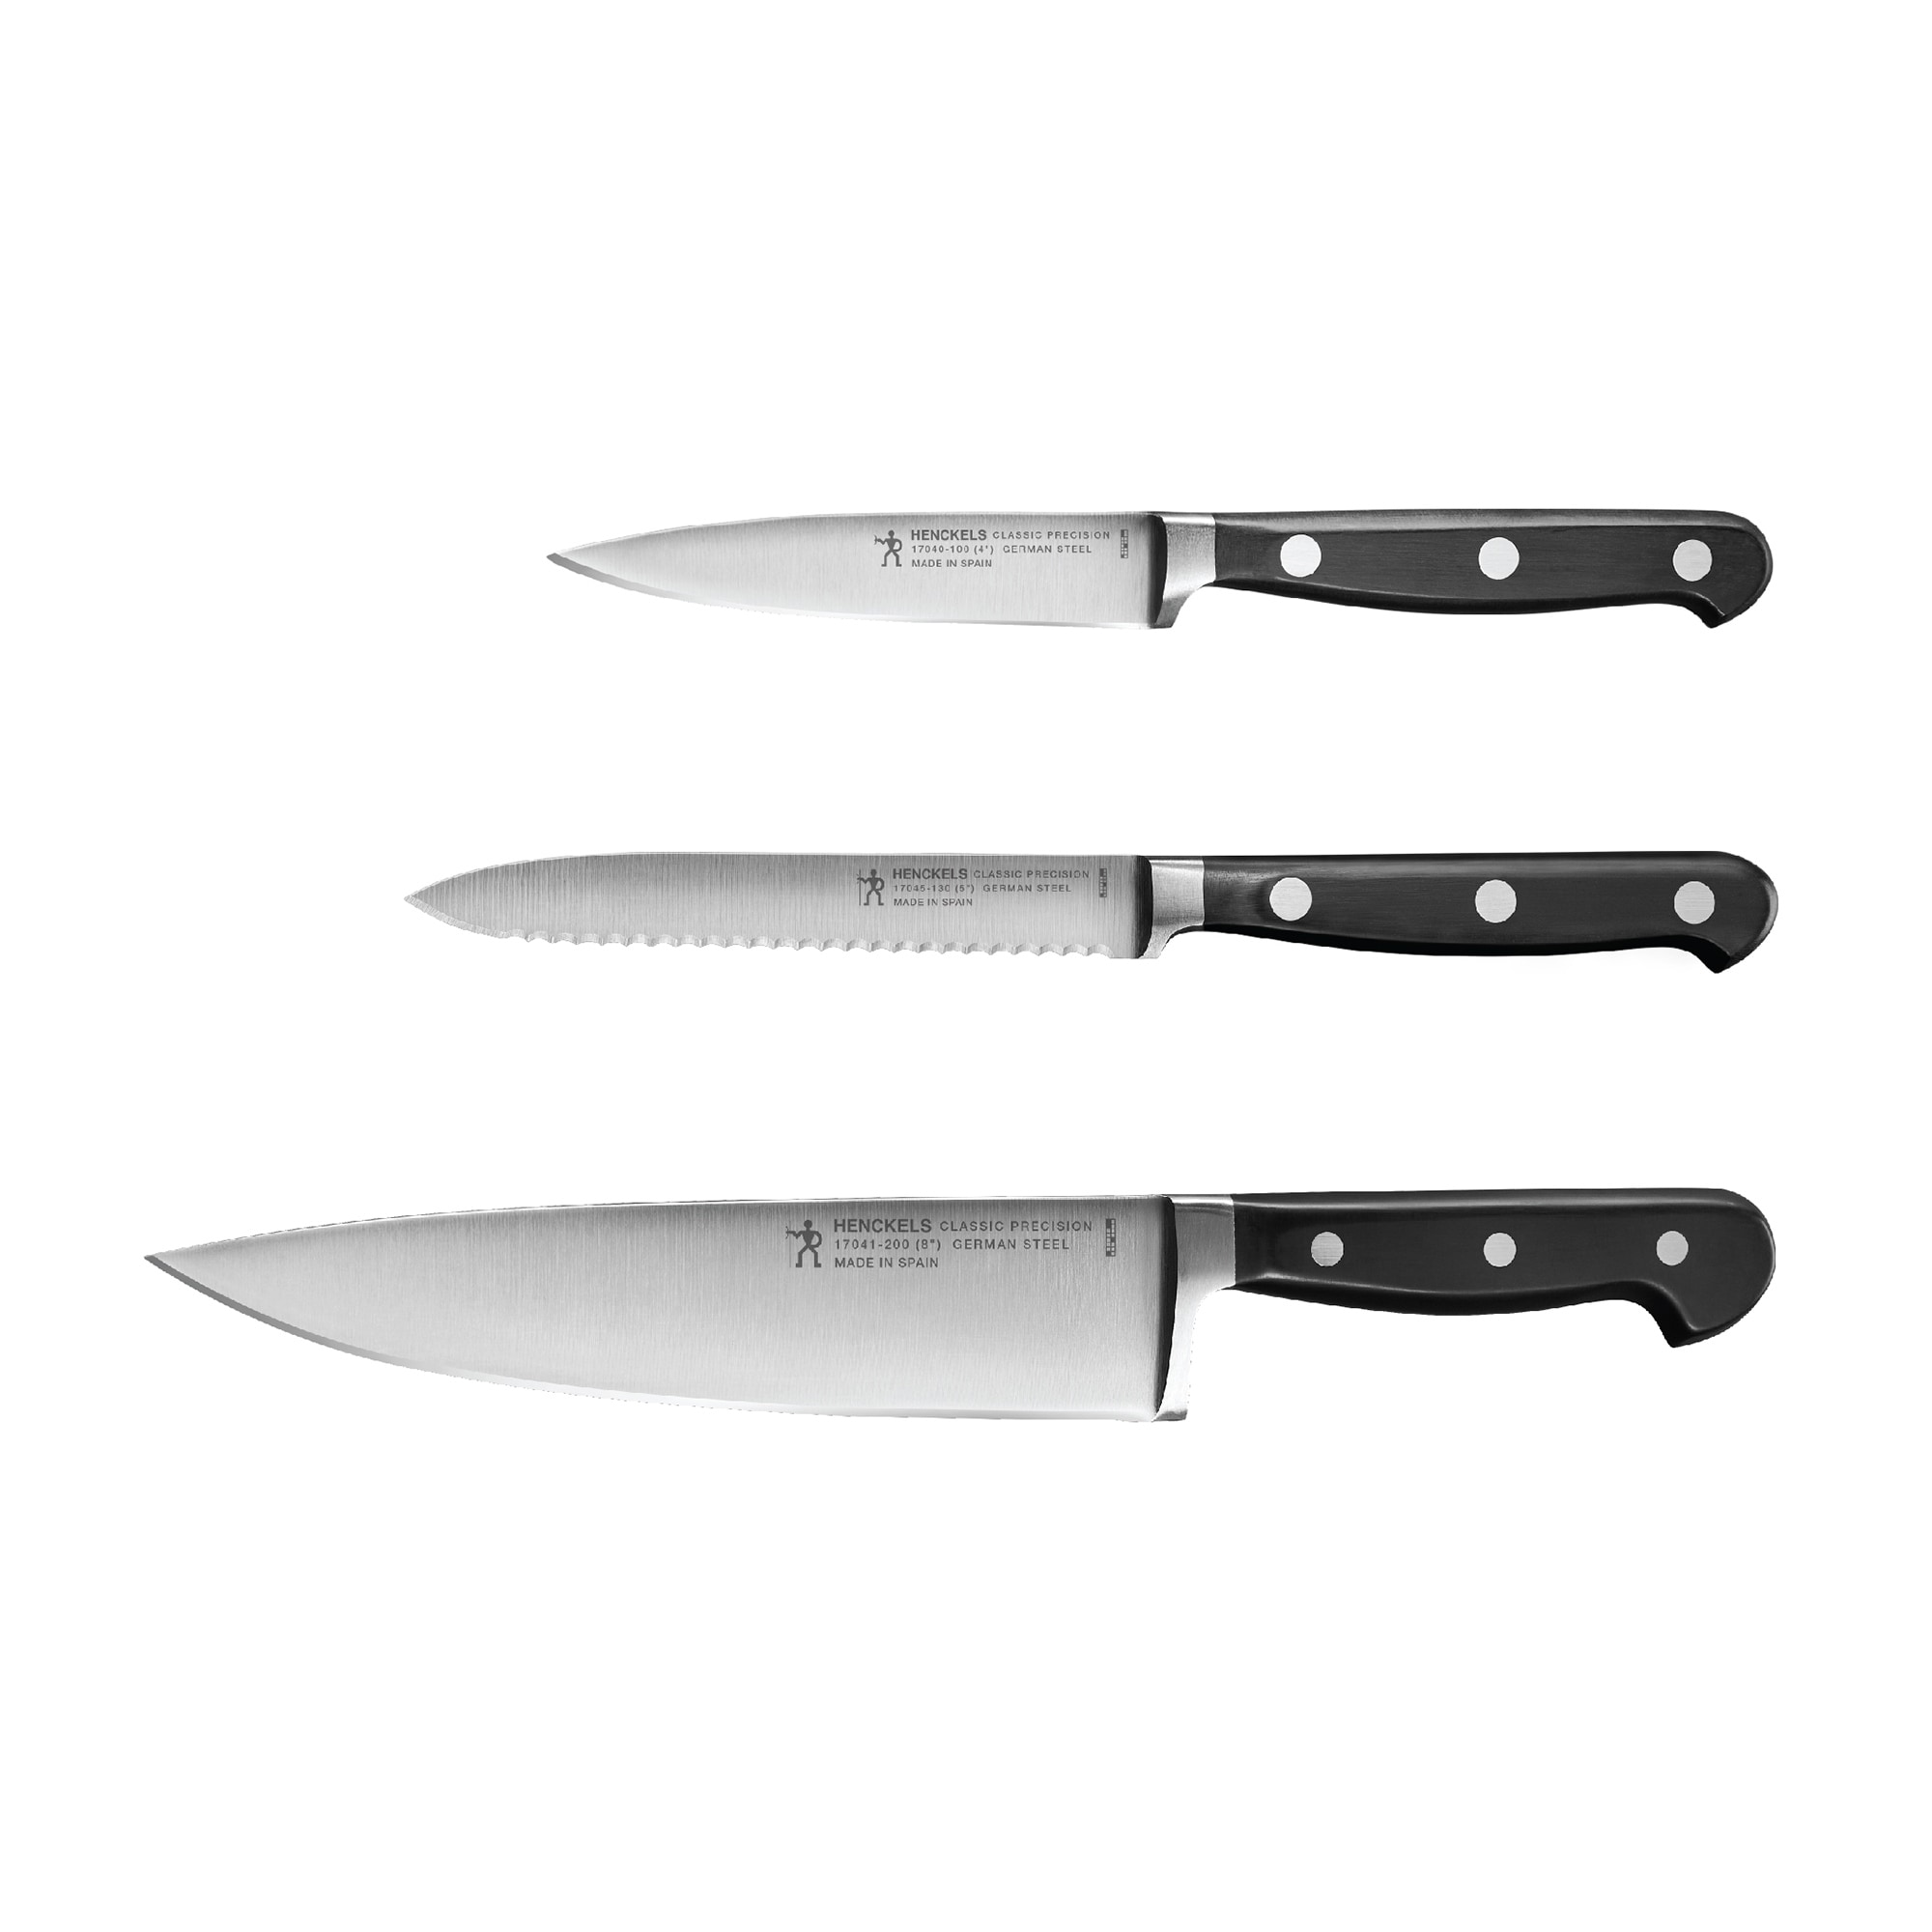 https://ak1.ostkcdn.com/images/products/is/images/direct/c7502bb6bc43434aa36b890cf3283ed74492620d/Henckels-Classic-Precision-3-pc-Starter-Knife-Set.jpg